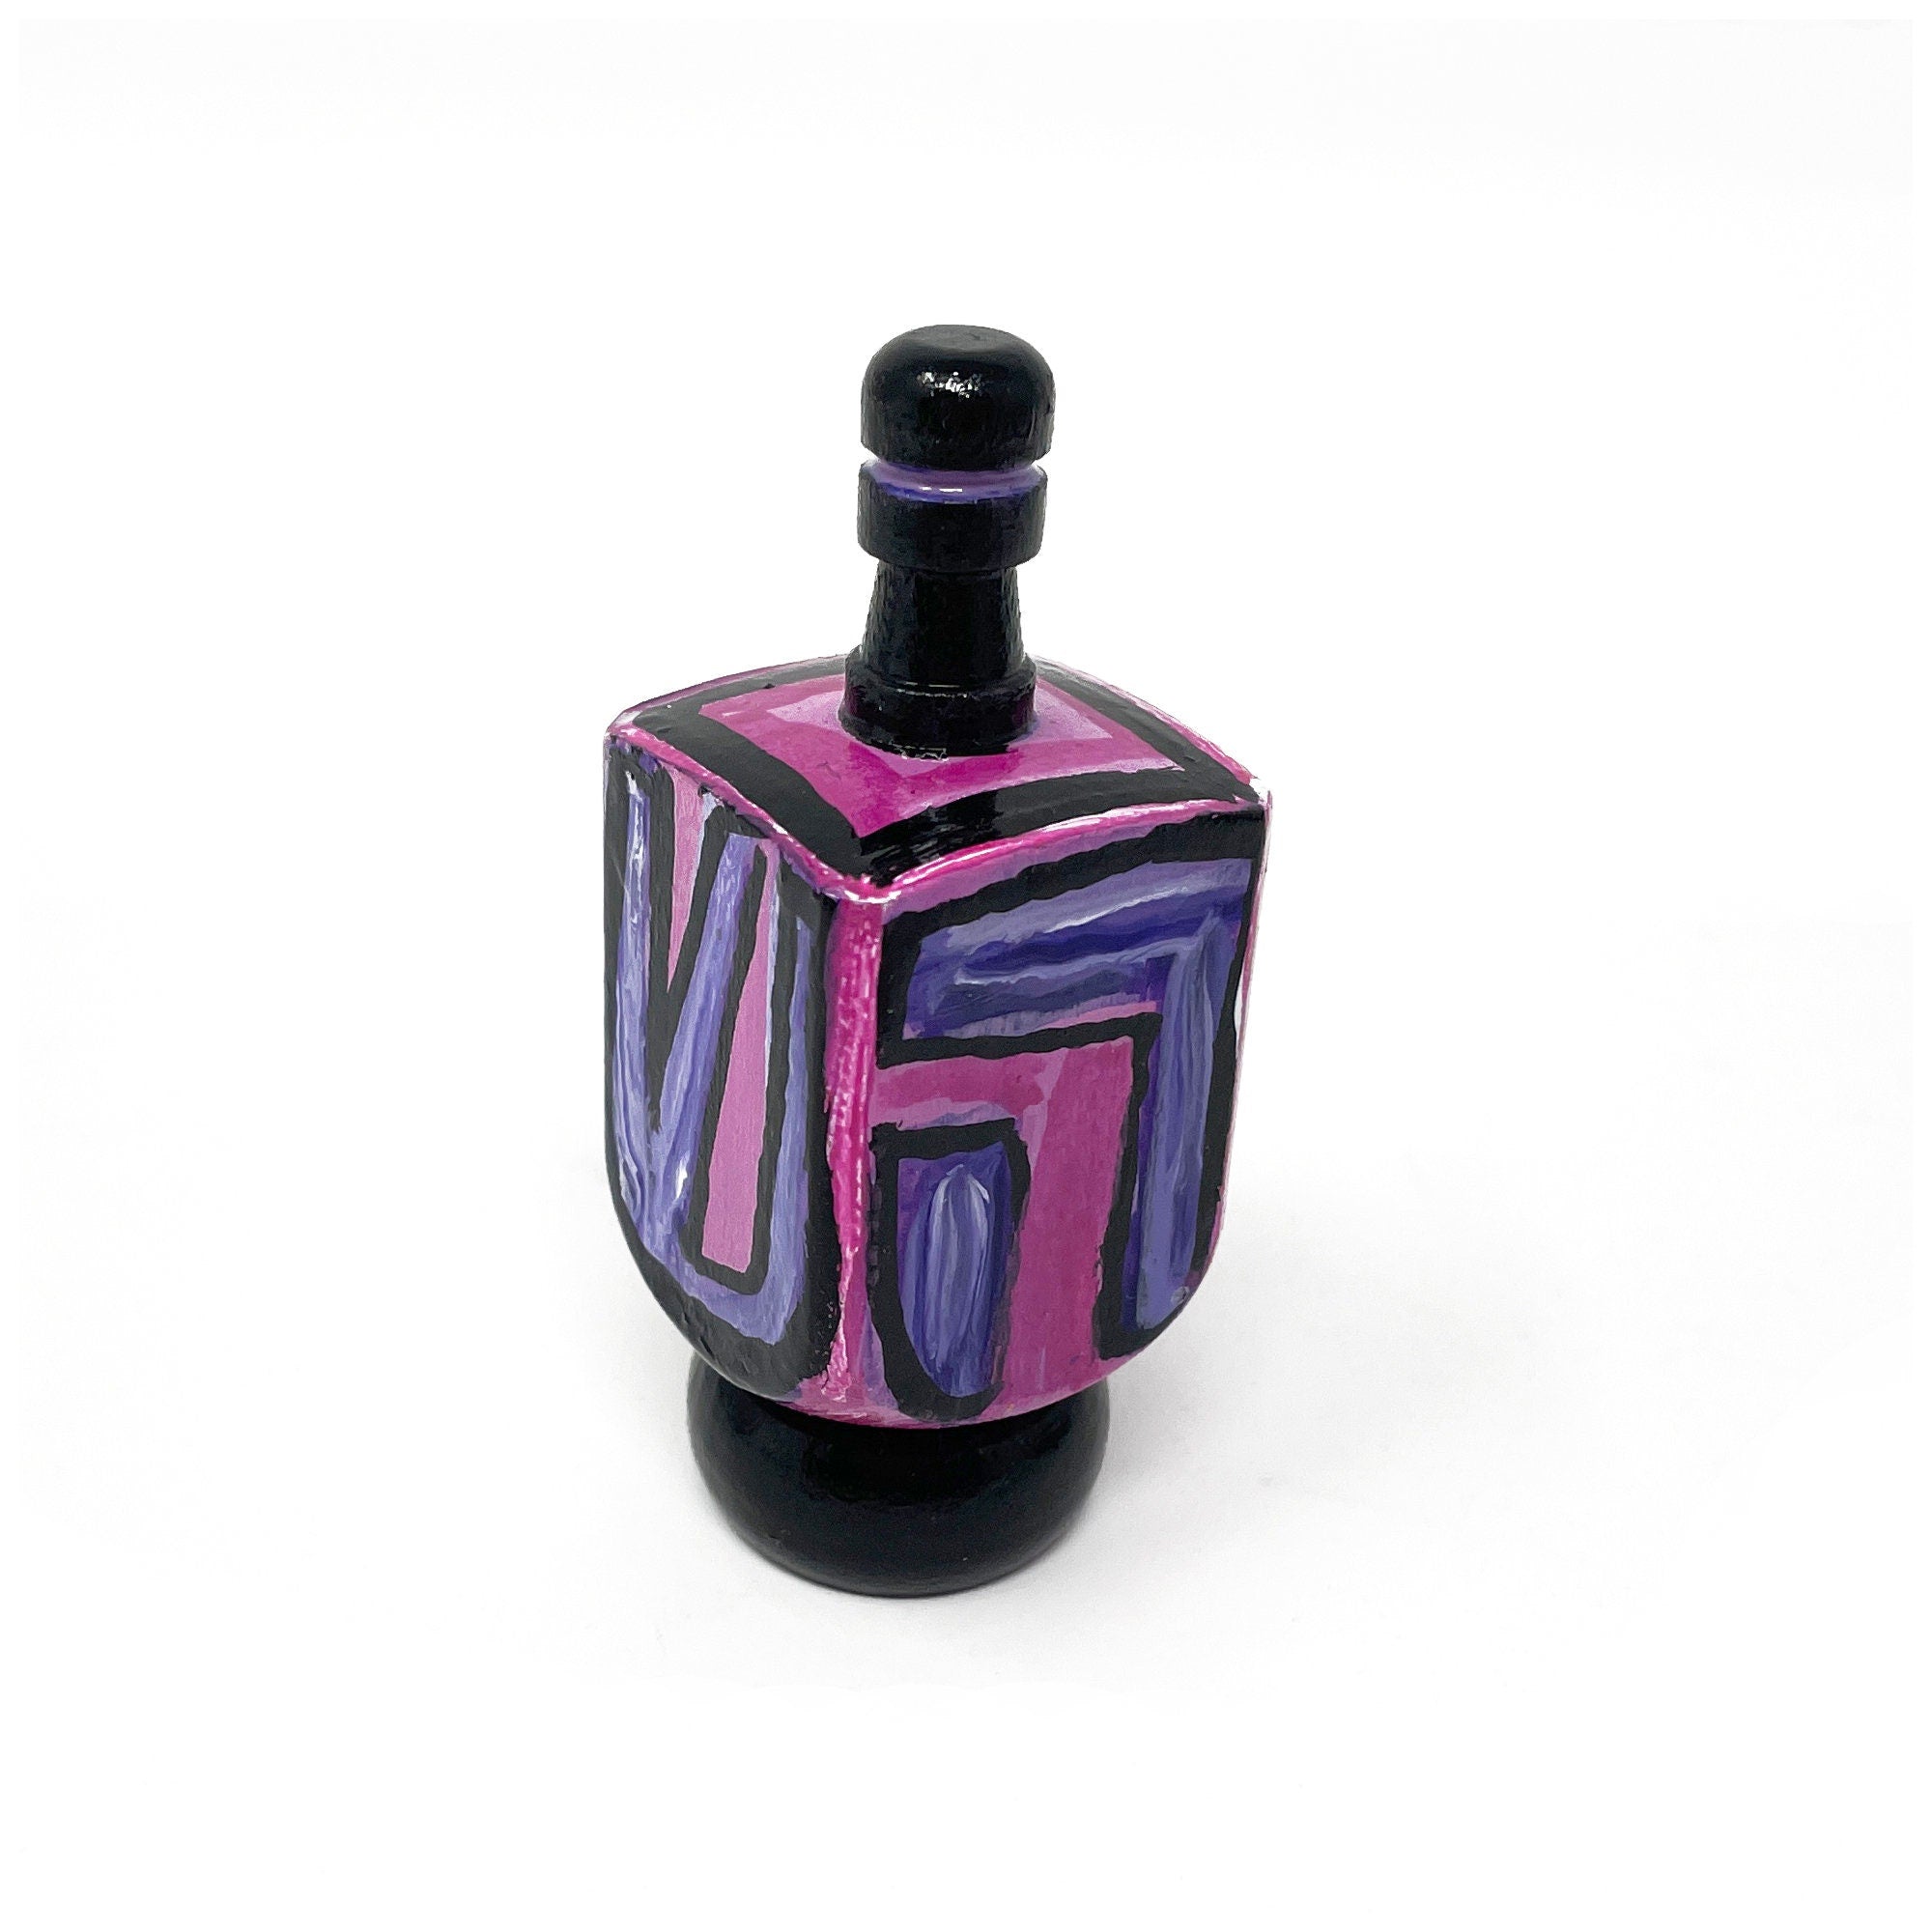 Purple and Pink Dreidel with Display Stand - Hand Painted Gift for Hanukkah by Claudine Intner